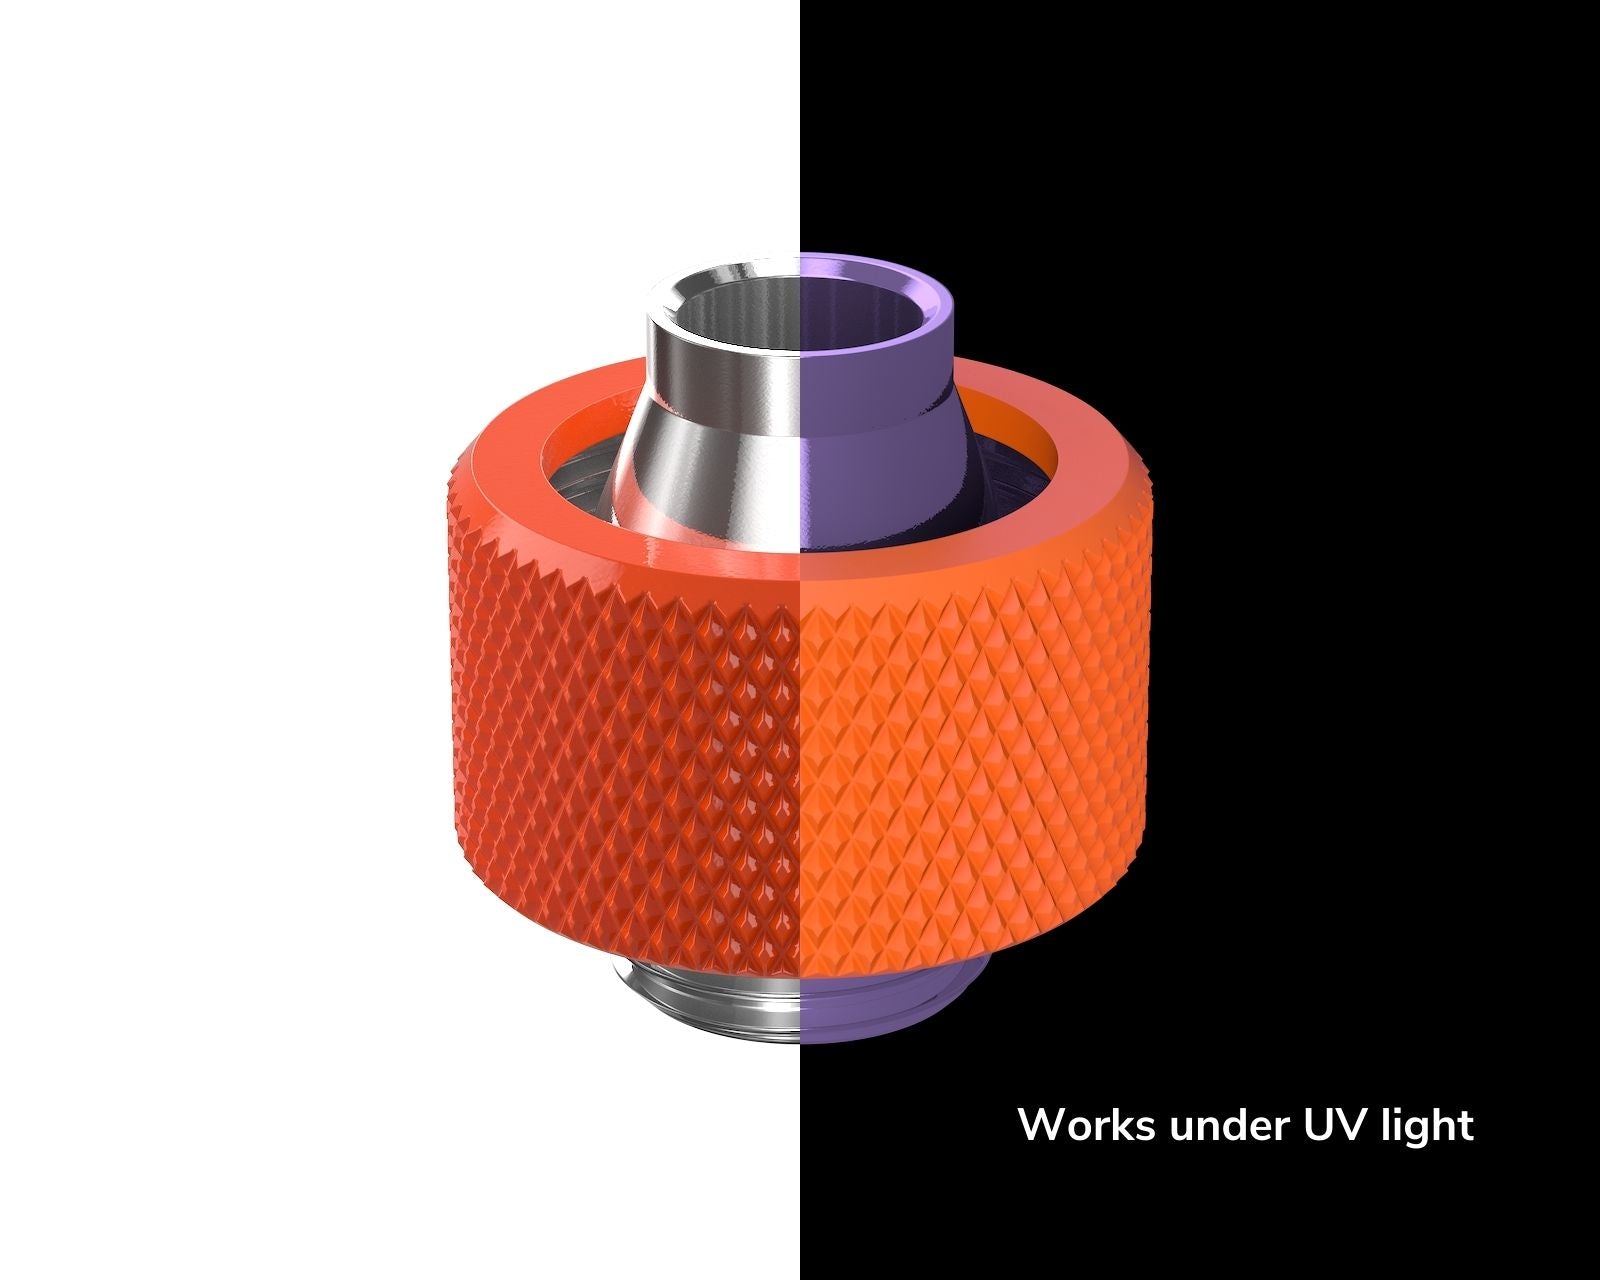 PrimoChill SecureFit SX - Premium Compression Fitting For 3/8in ID x 5/8in OD Flexible Tubing (F-SFSX58) - Available in 20+ Colors, Custom Watercooling Loop Ready - UV Orange